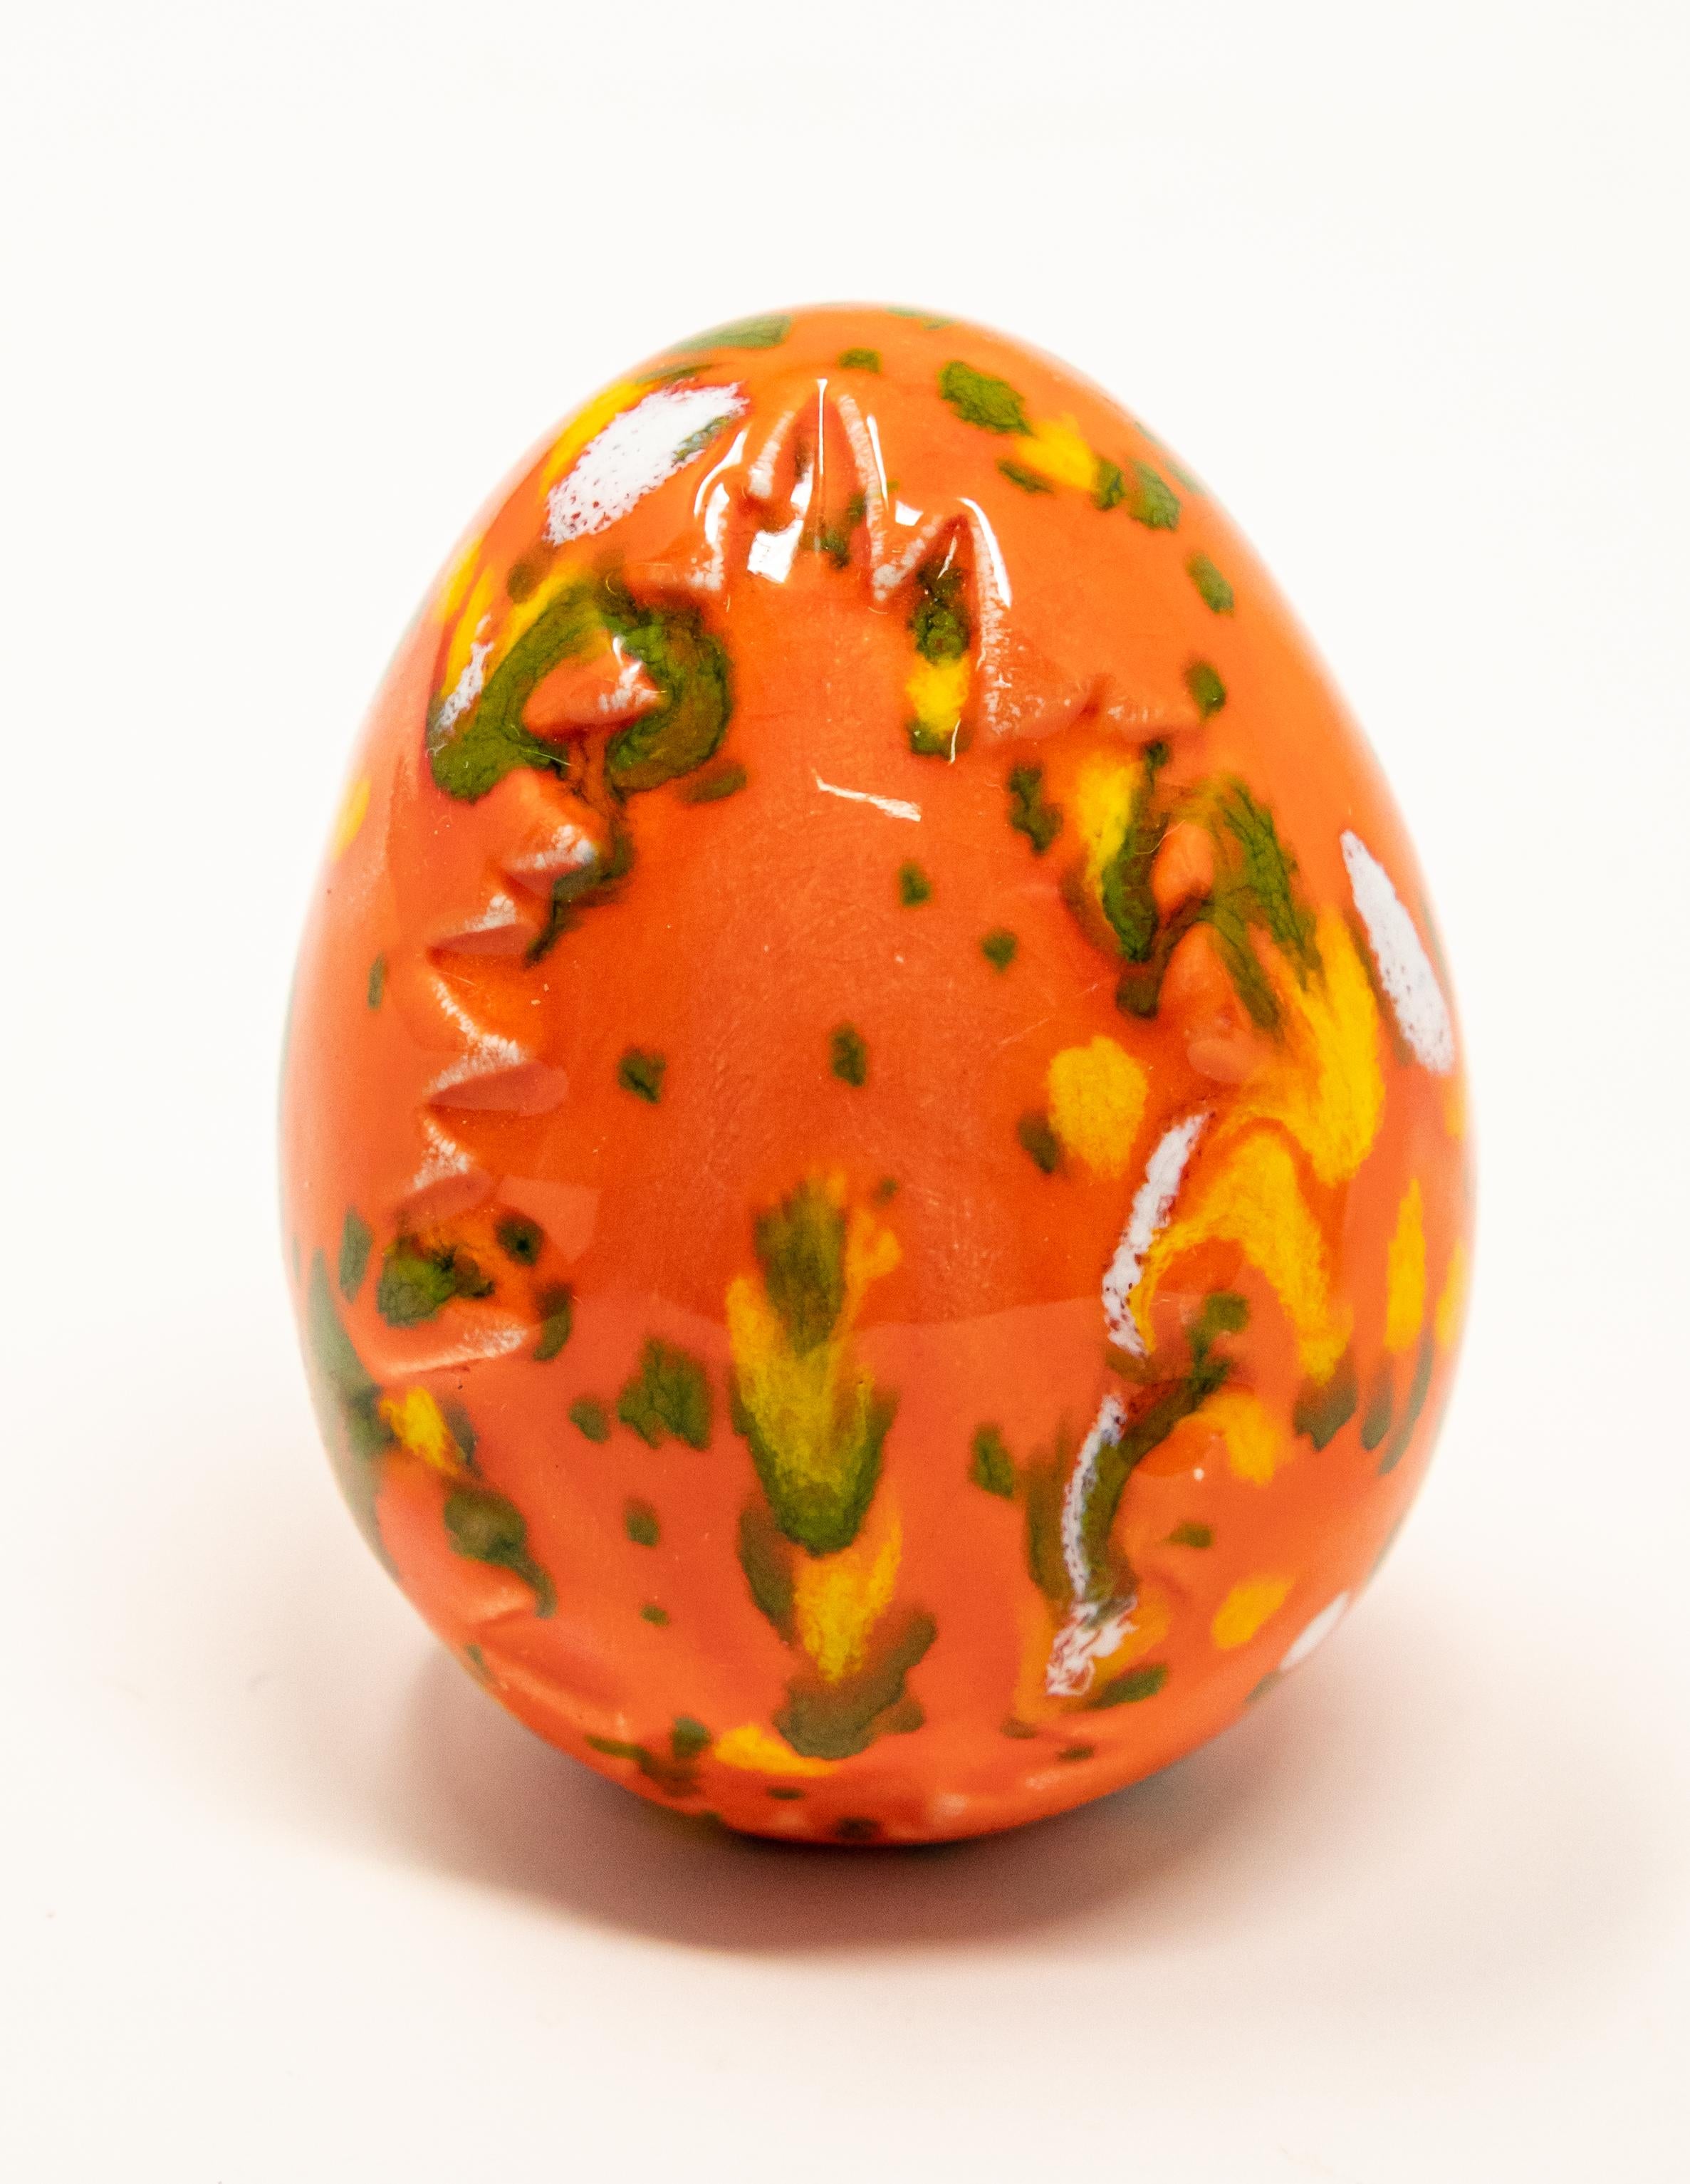 Offering this pair of ceramic glazed eggs. One is bright orange with green and yellow, and has a tree stamped in it. The other is cream and white, with accents of orange and yellow. Also has striped and geometric patterns.